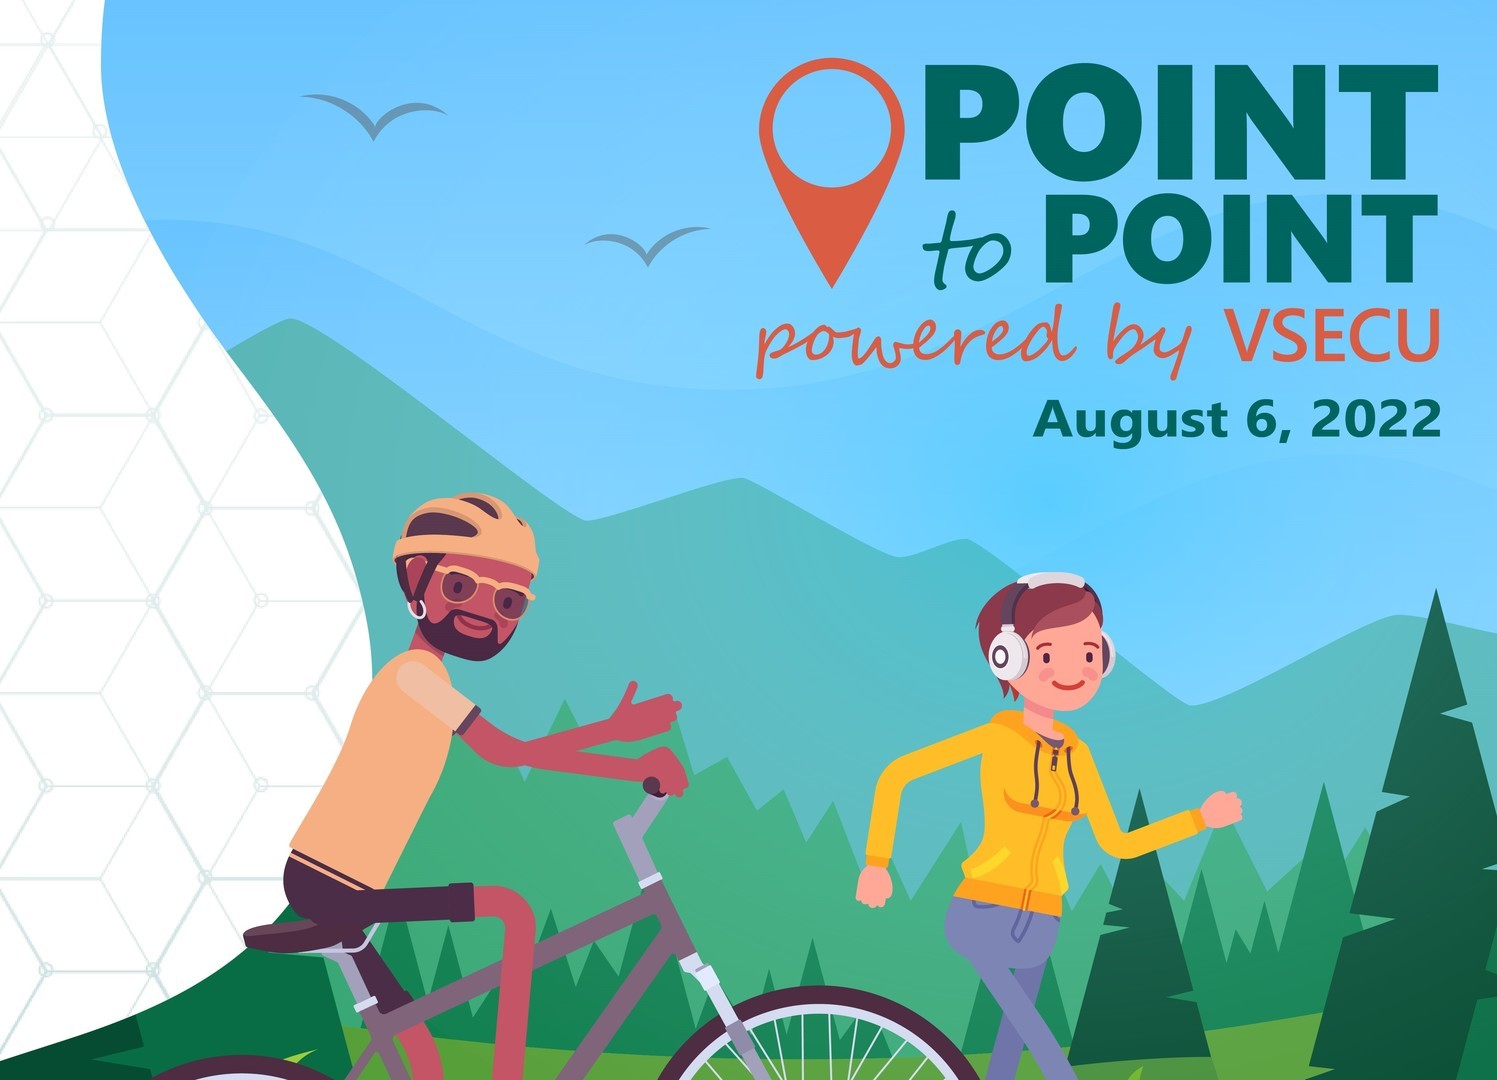 The Point to Point, powered by VSECU, Montpelier, Vermont, United States